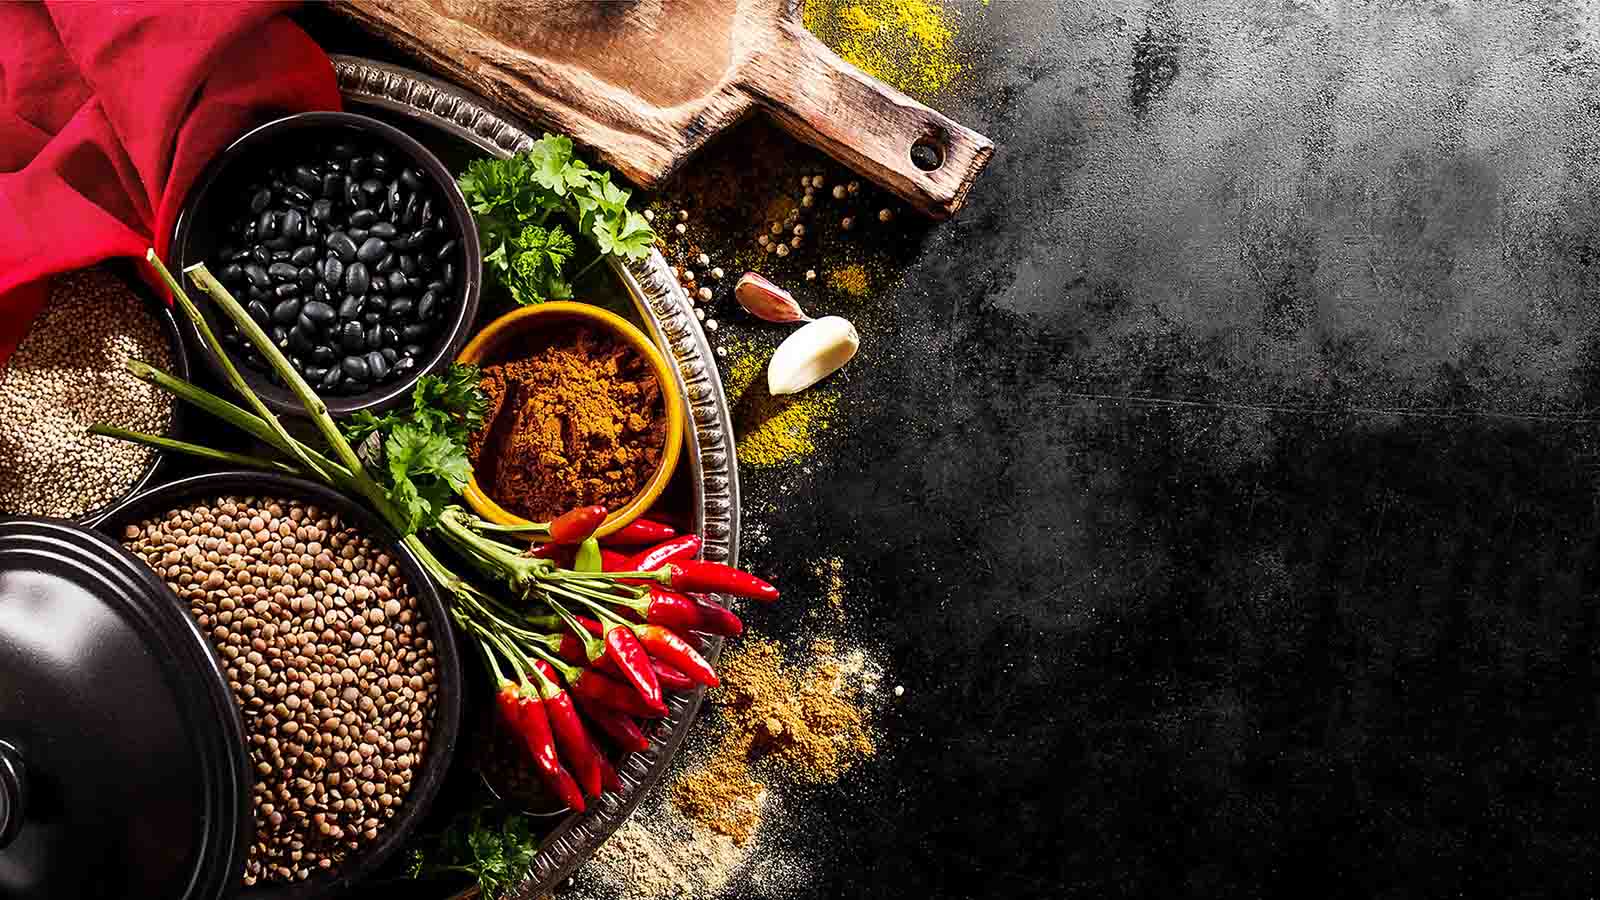 100+] Spices Wallpapers | Wallpapers.com